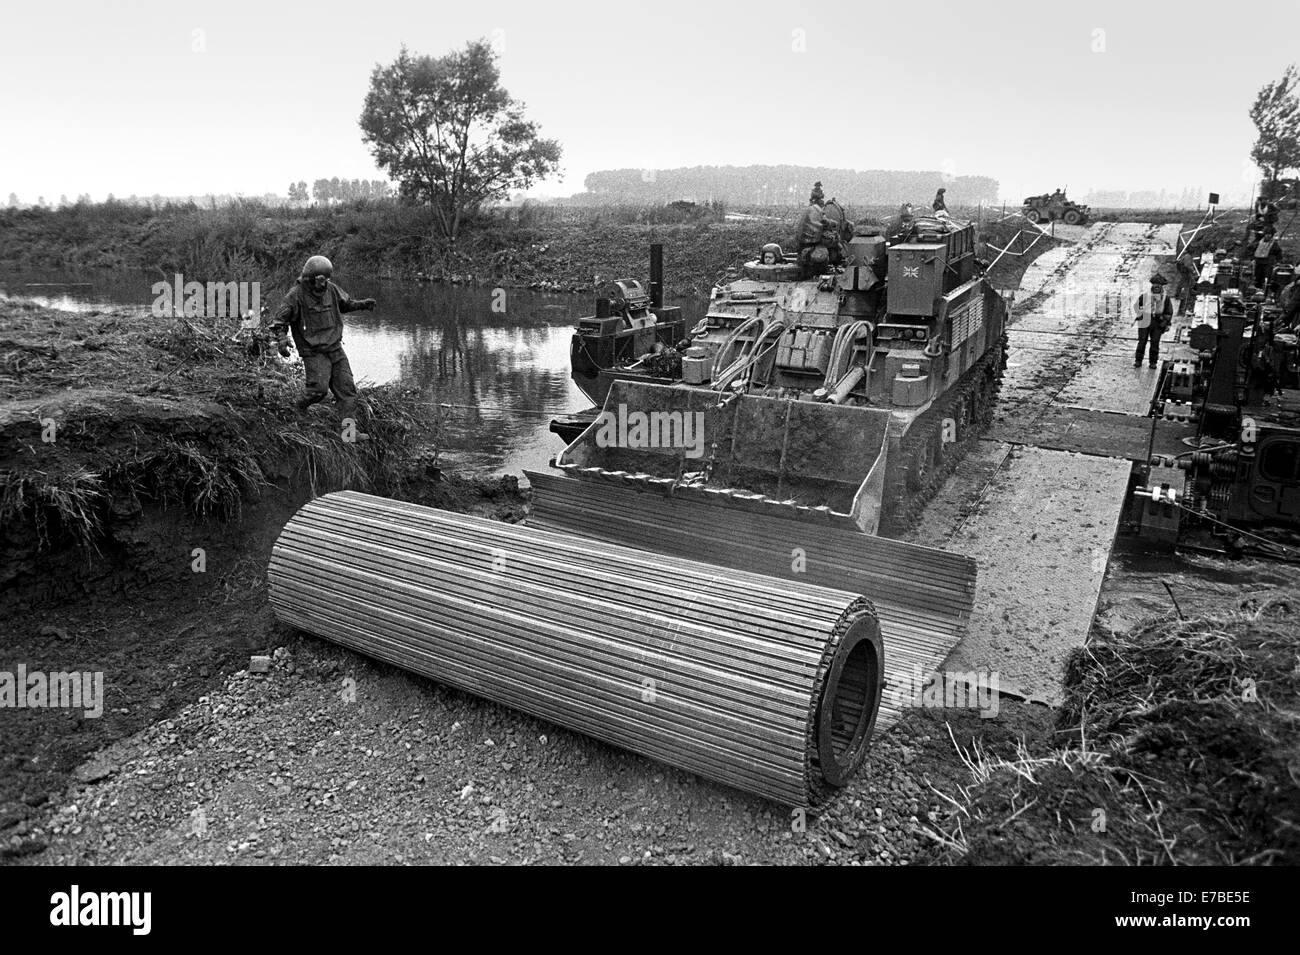 NATO exercises in Germany, British Army armored vehicles cross a pontoon bridge (September 1984) Stock Photo